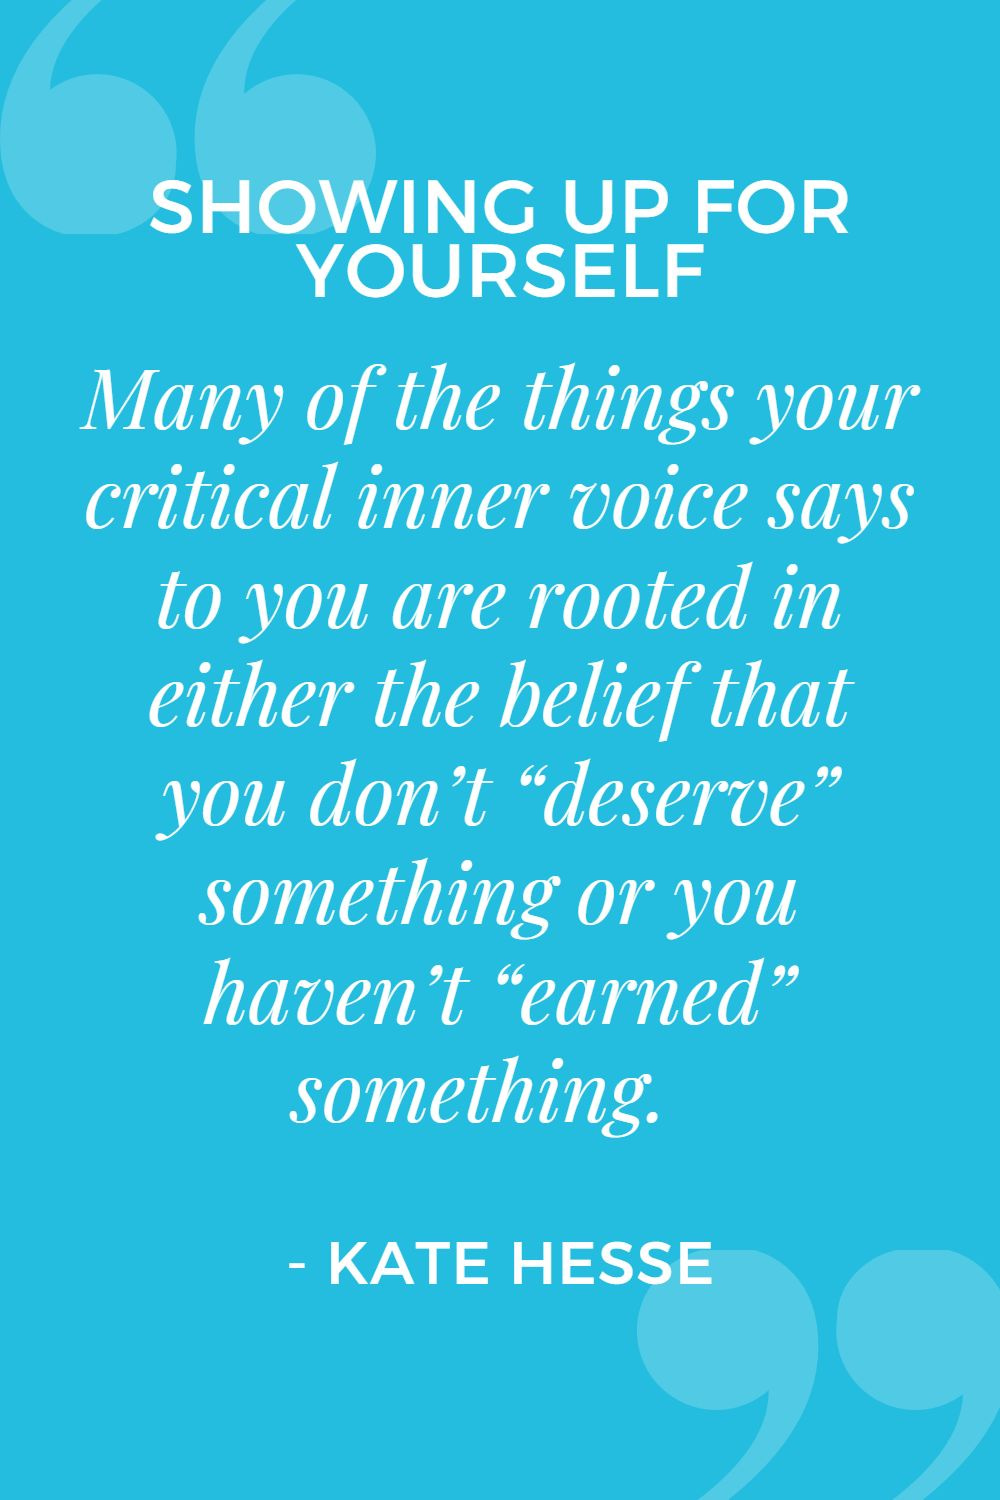 Many of the things your critical inner voice says to your are rooted in either the belief that you don't "deserve" something or you haven't "earned" something.